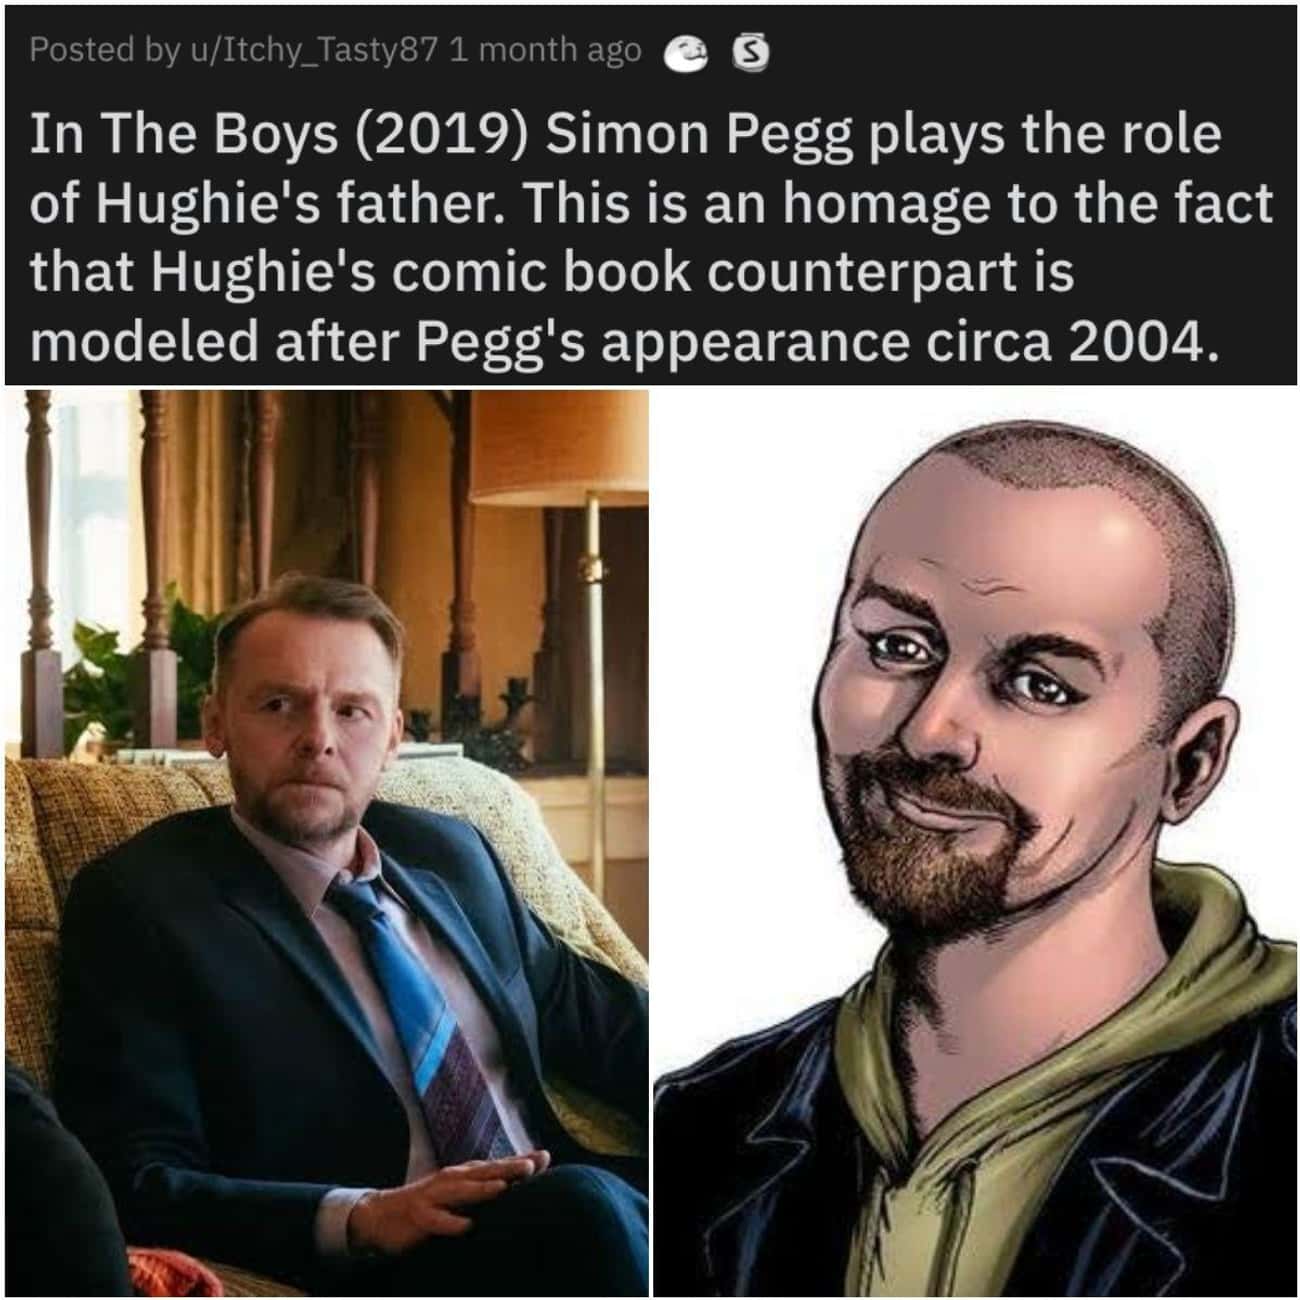 Simon Pegg Was Cast As Hughie's Father For A Good Reason